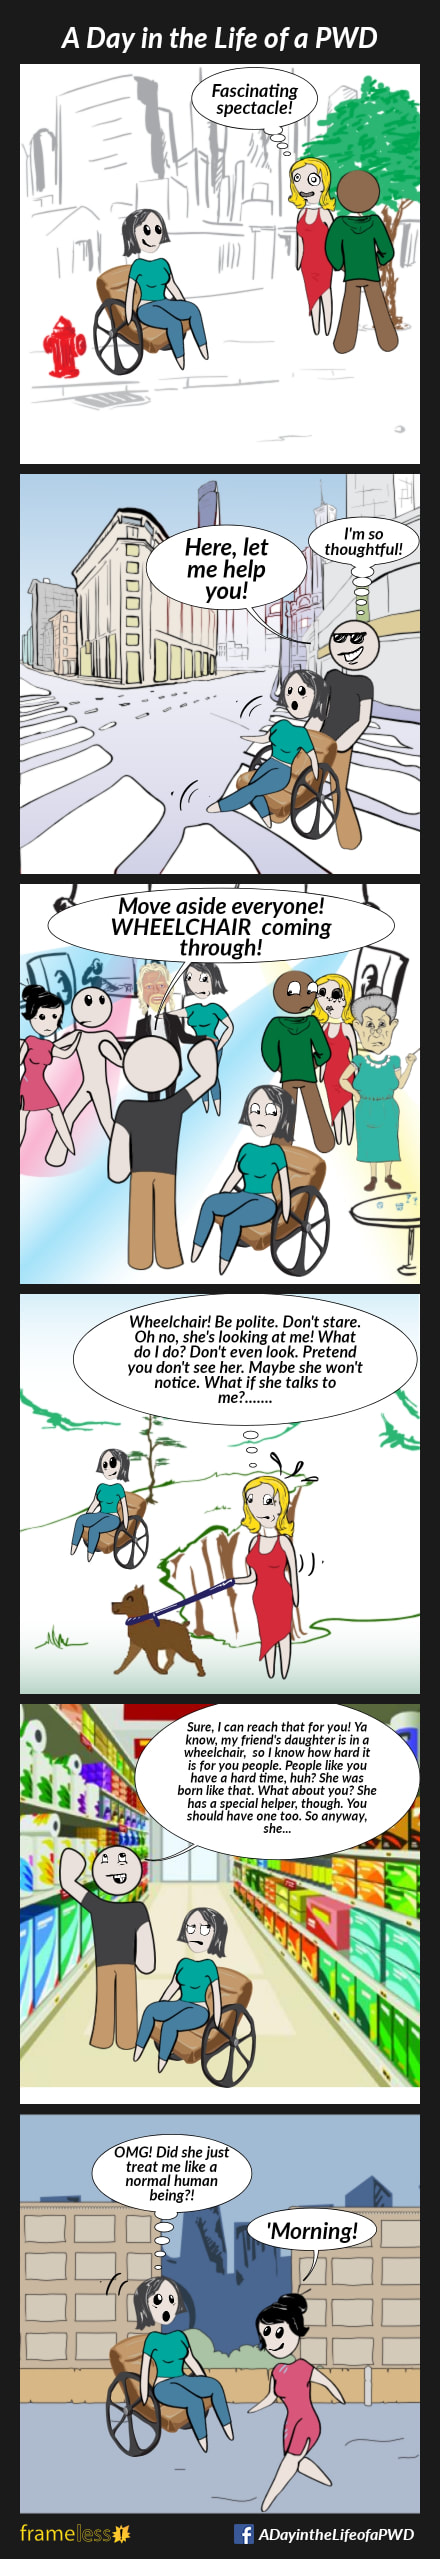 COMIC STRIP 
A Day in the Life of a PWD (Person With a Disability) 

Frame 1:
A woman in a wheelchair is traveling down a sidewalk. Another woman, who is chatting with a man, openly stares at her, thinking 